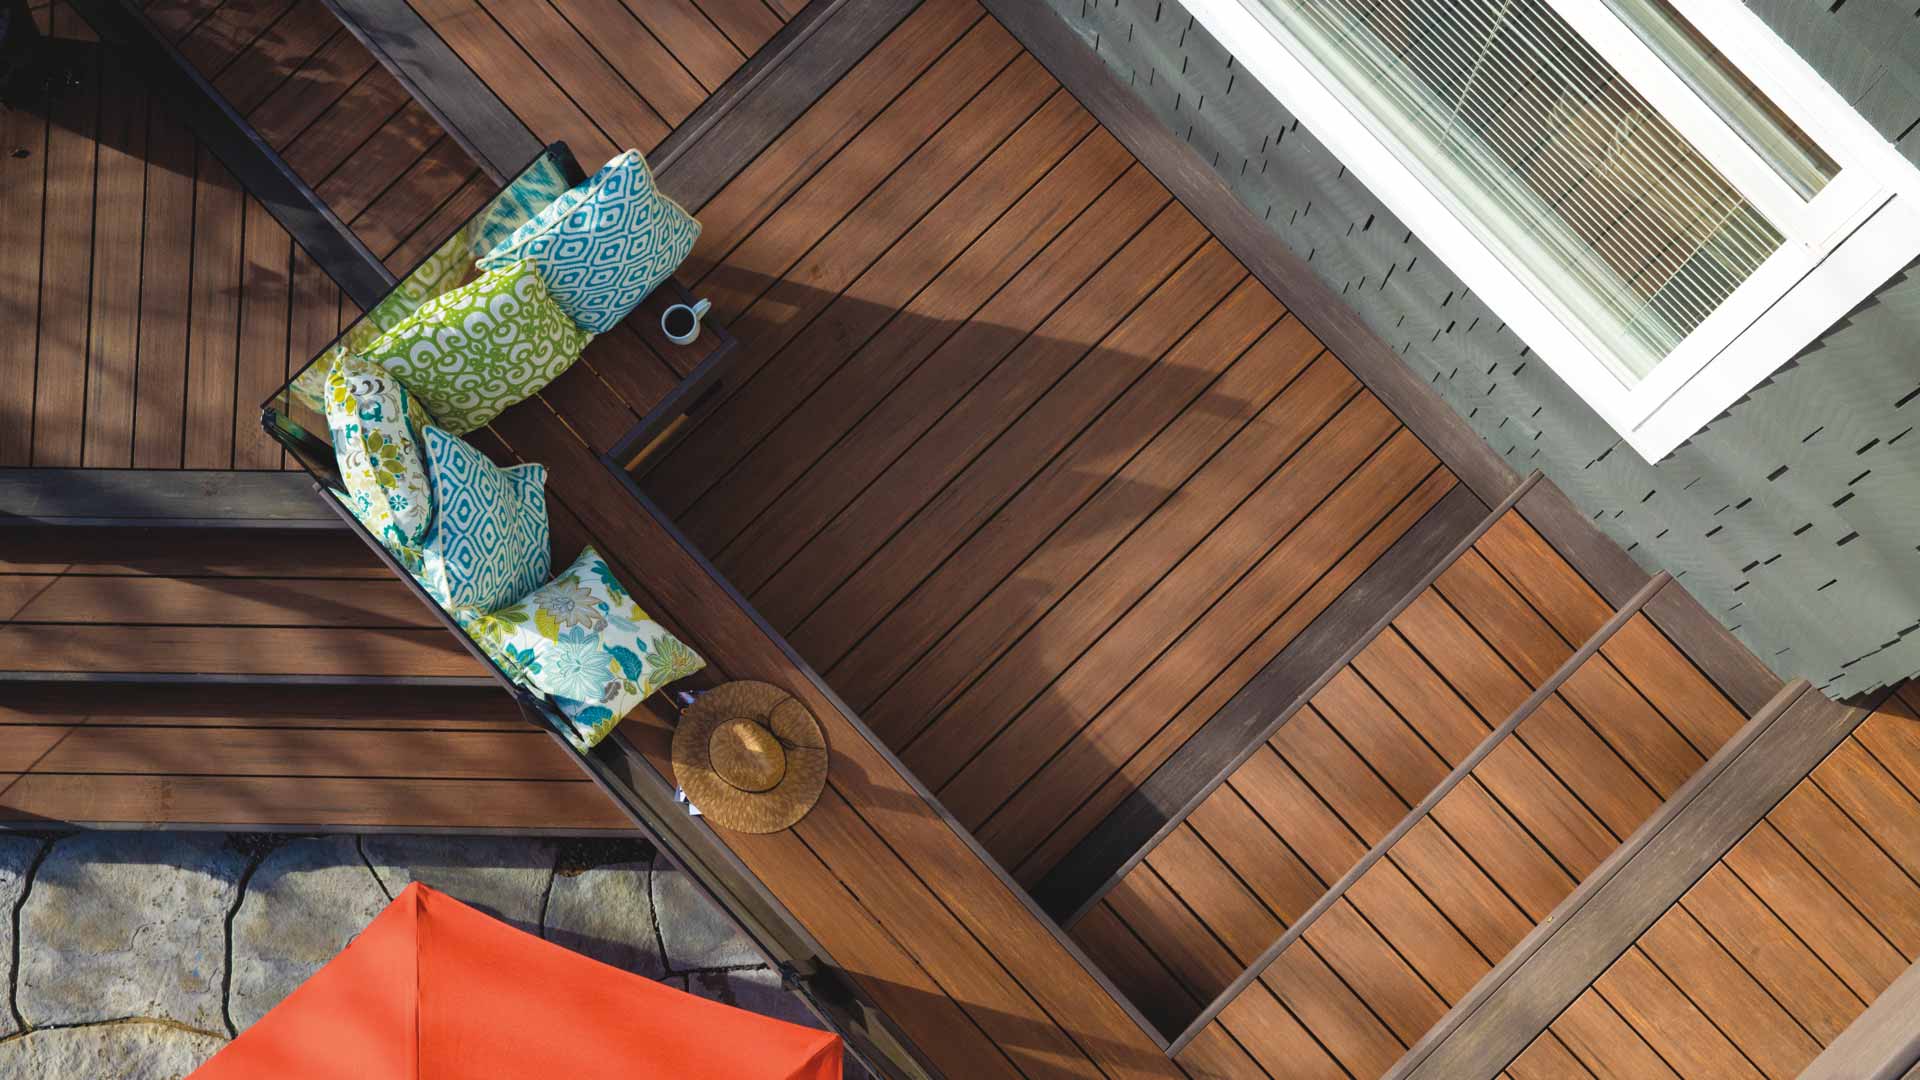 Overhead shot of pillows, a sun hat, and a coffee mug on a mahogany-colored deck